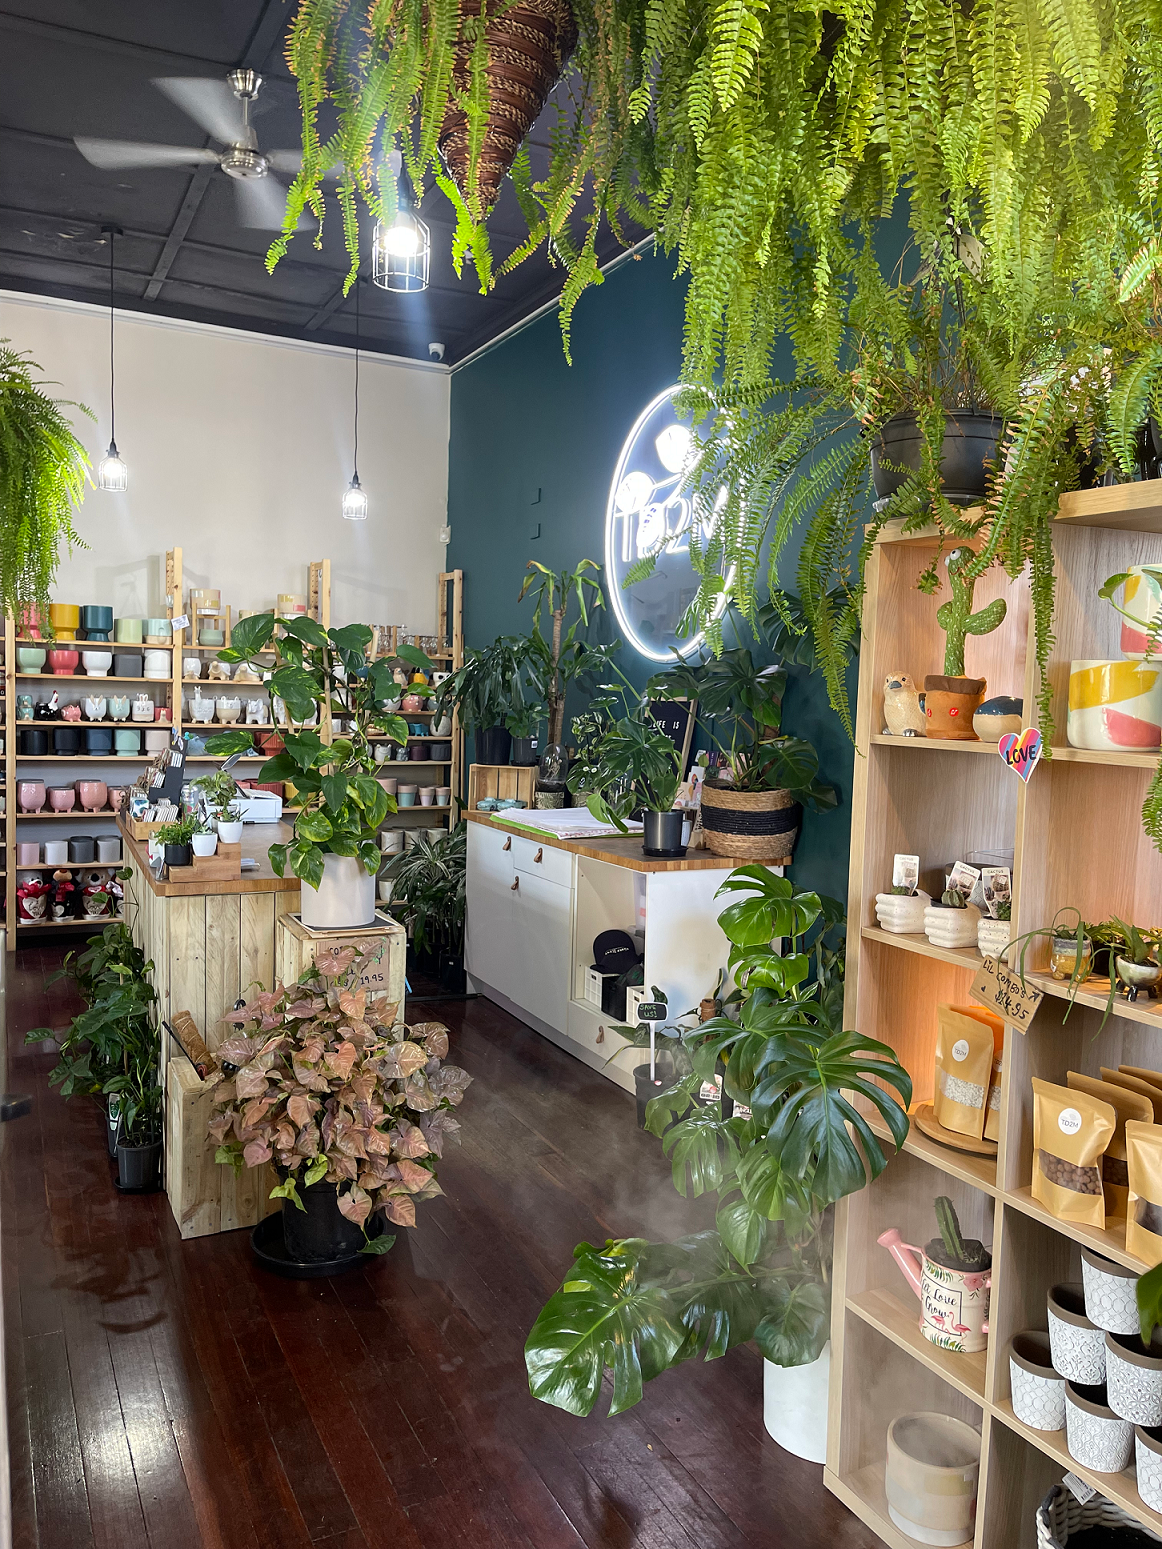 A photo of Talk Dirt 2 Me shop in Coburg. The shop is lush and green with many indoor plants and pots on display. There is a big neon sign with our logo TD2M.